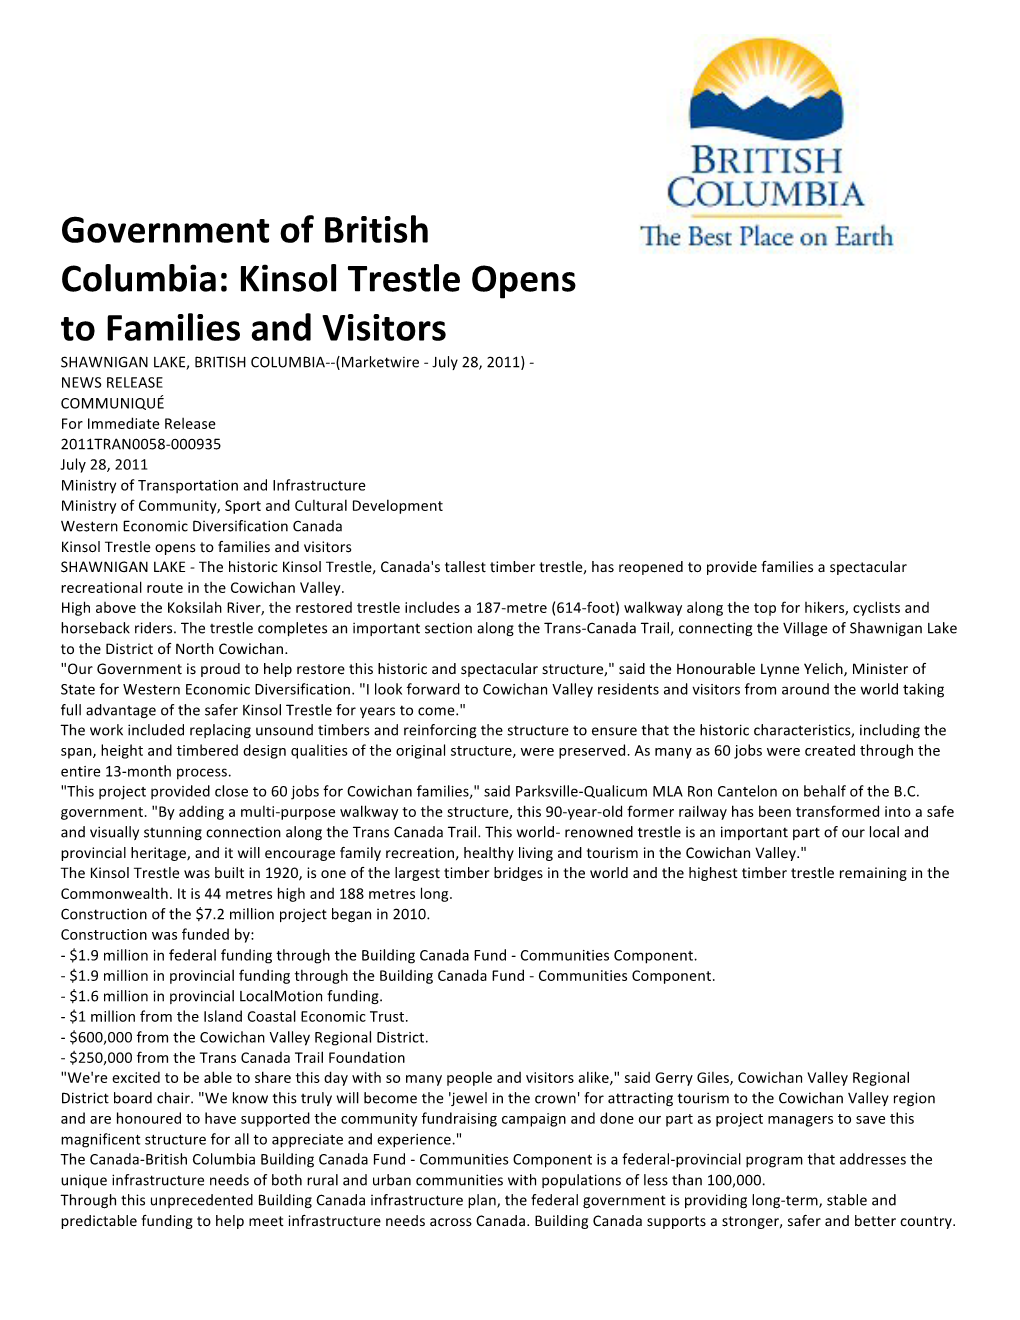 Government of British Columbia: Kinsol Trestle Opens to Families